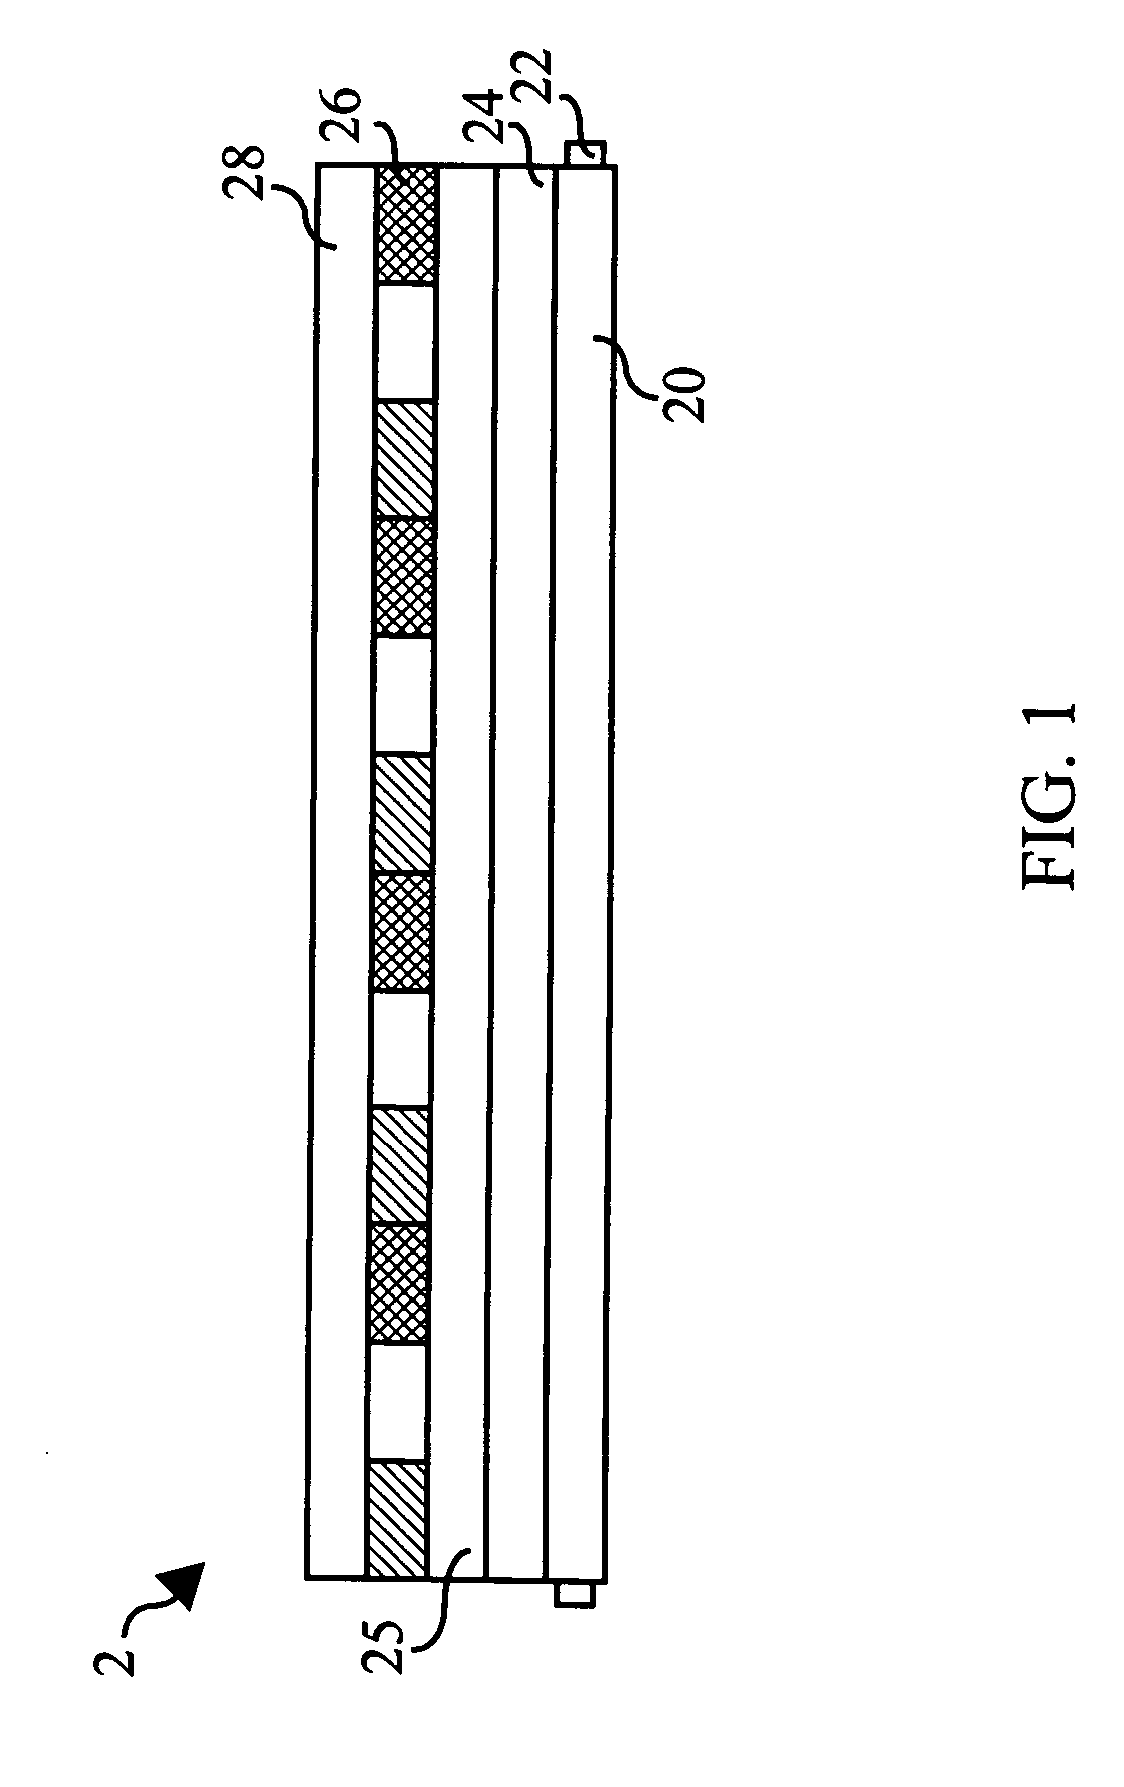 Display module using blue-ray or ultraviolet-ray light sources